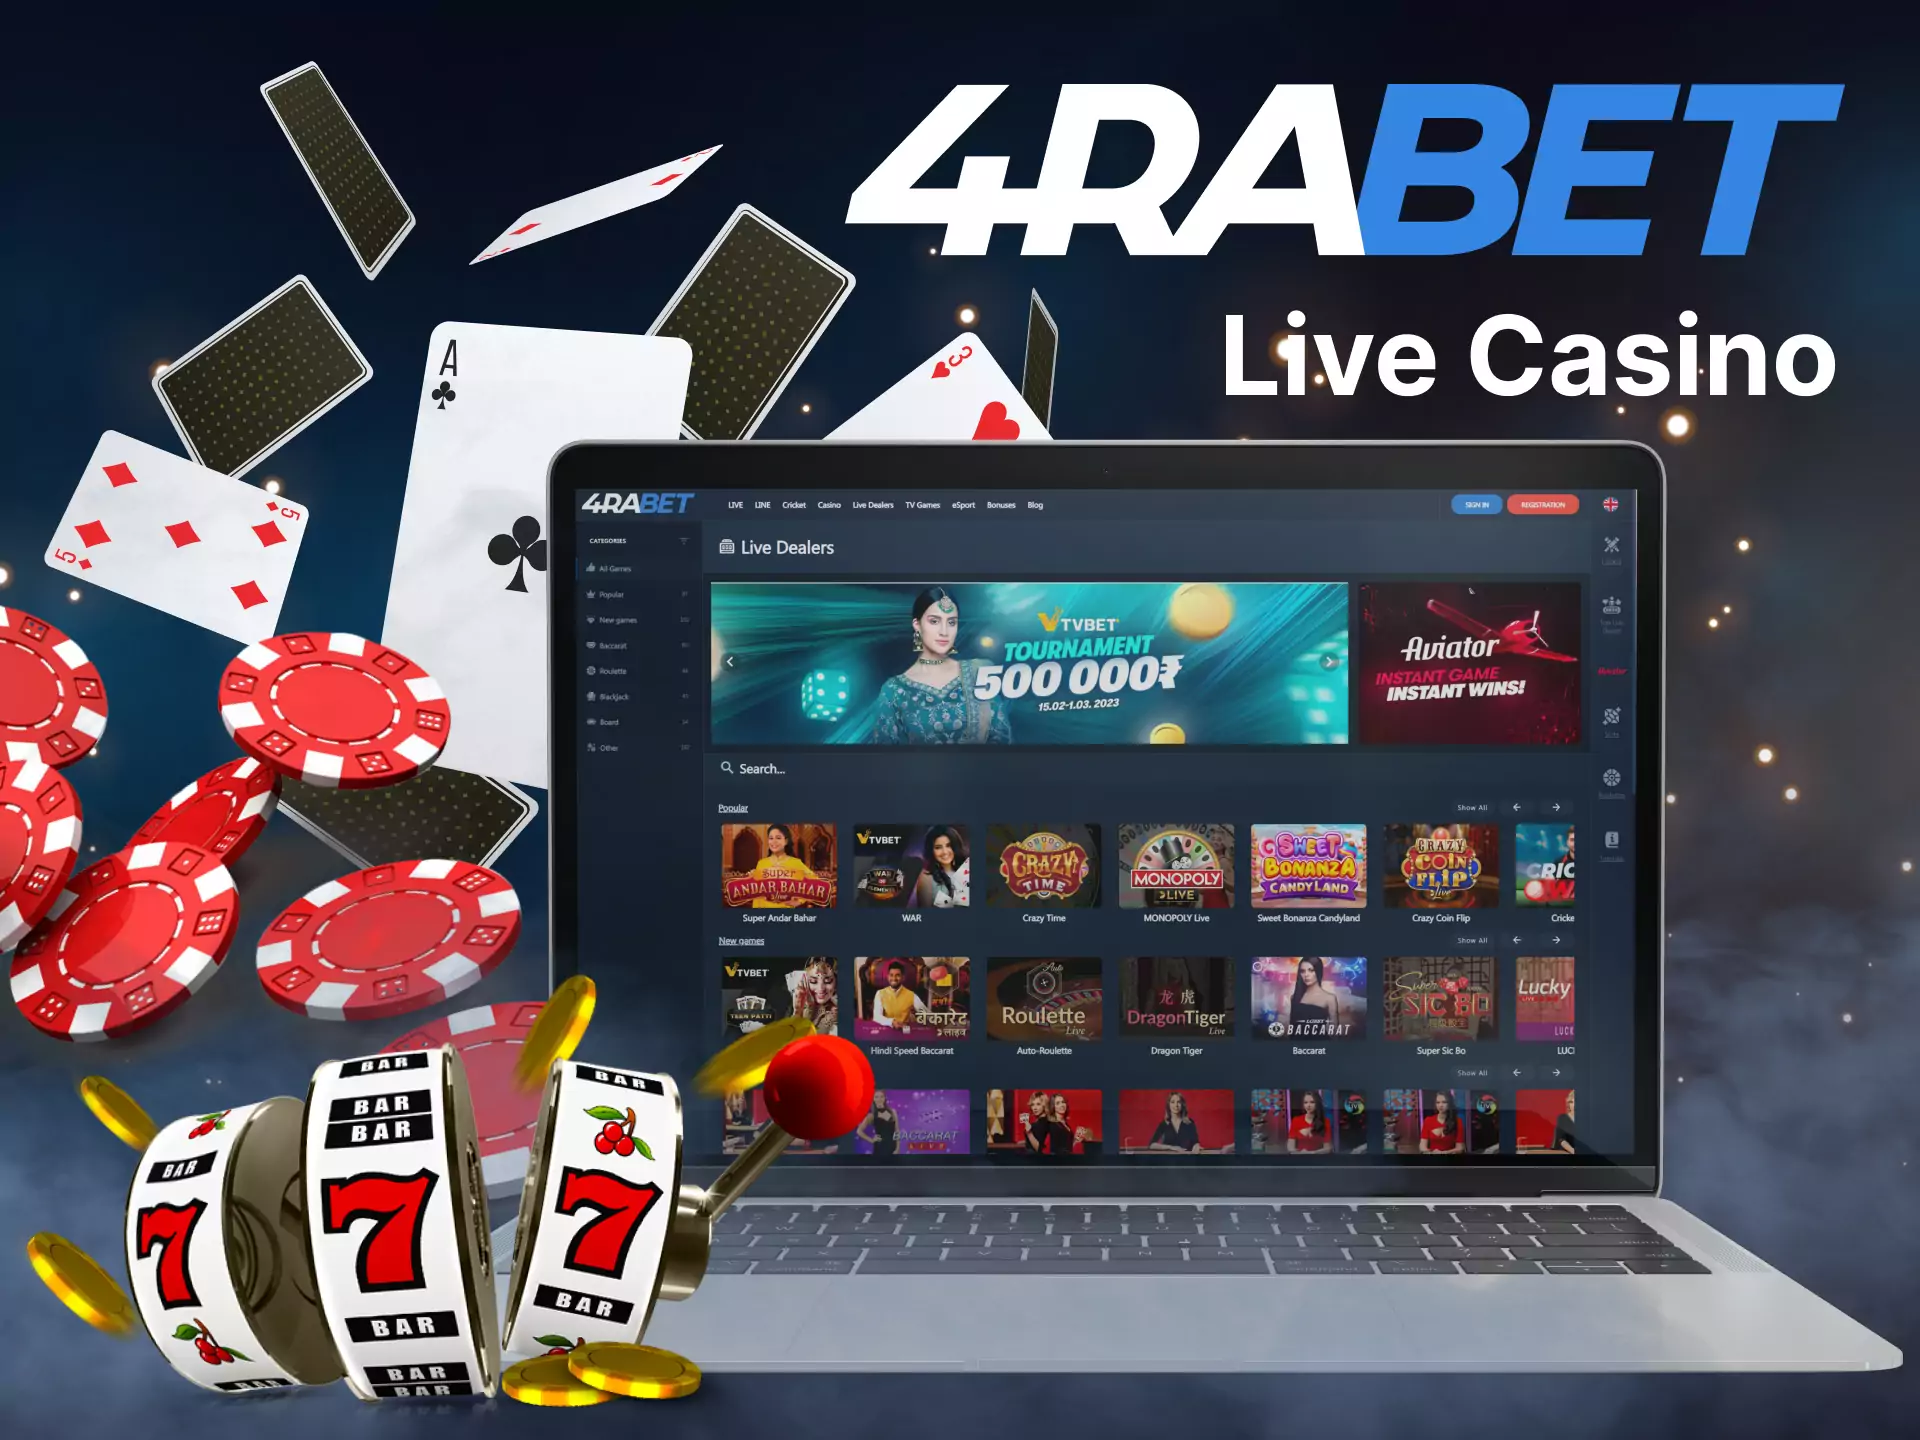 At 4rabet you can play different games in the live casino.